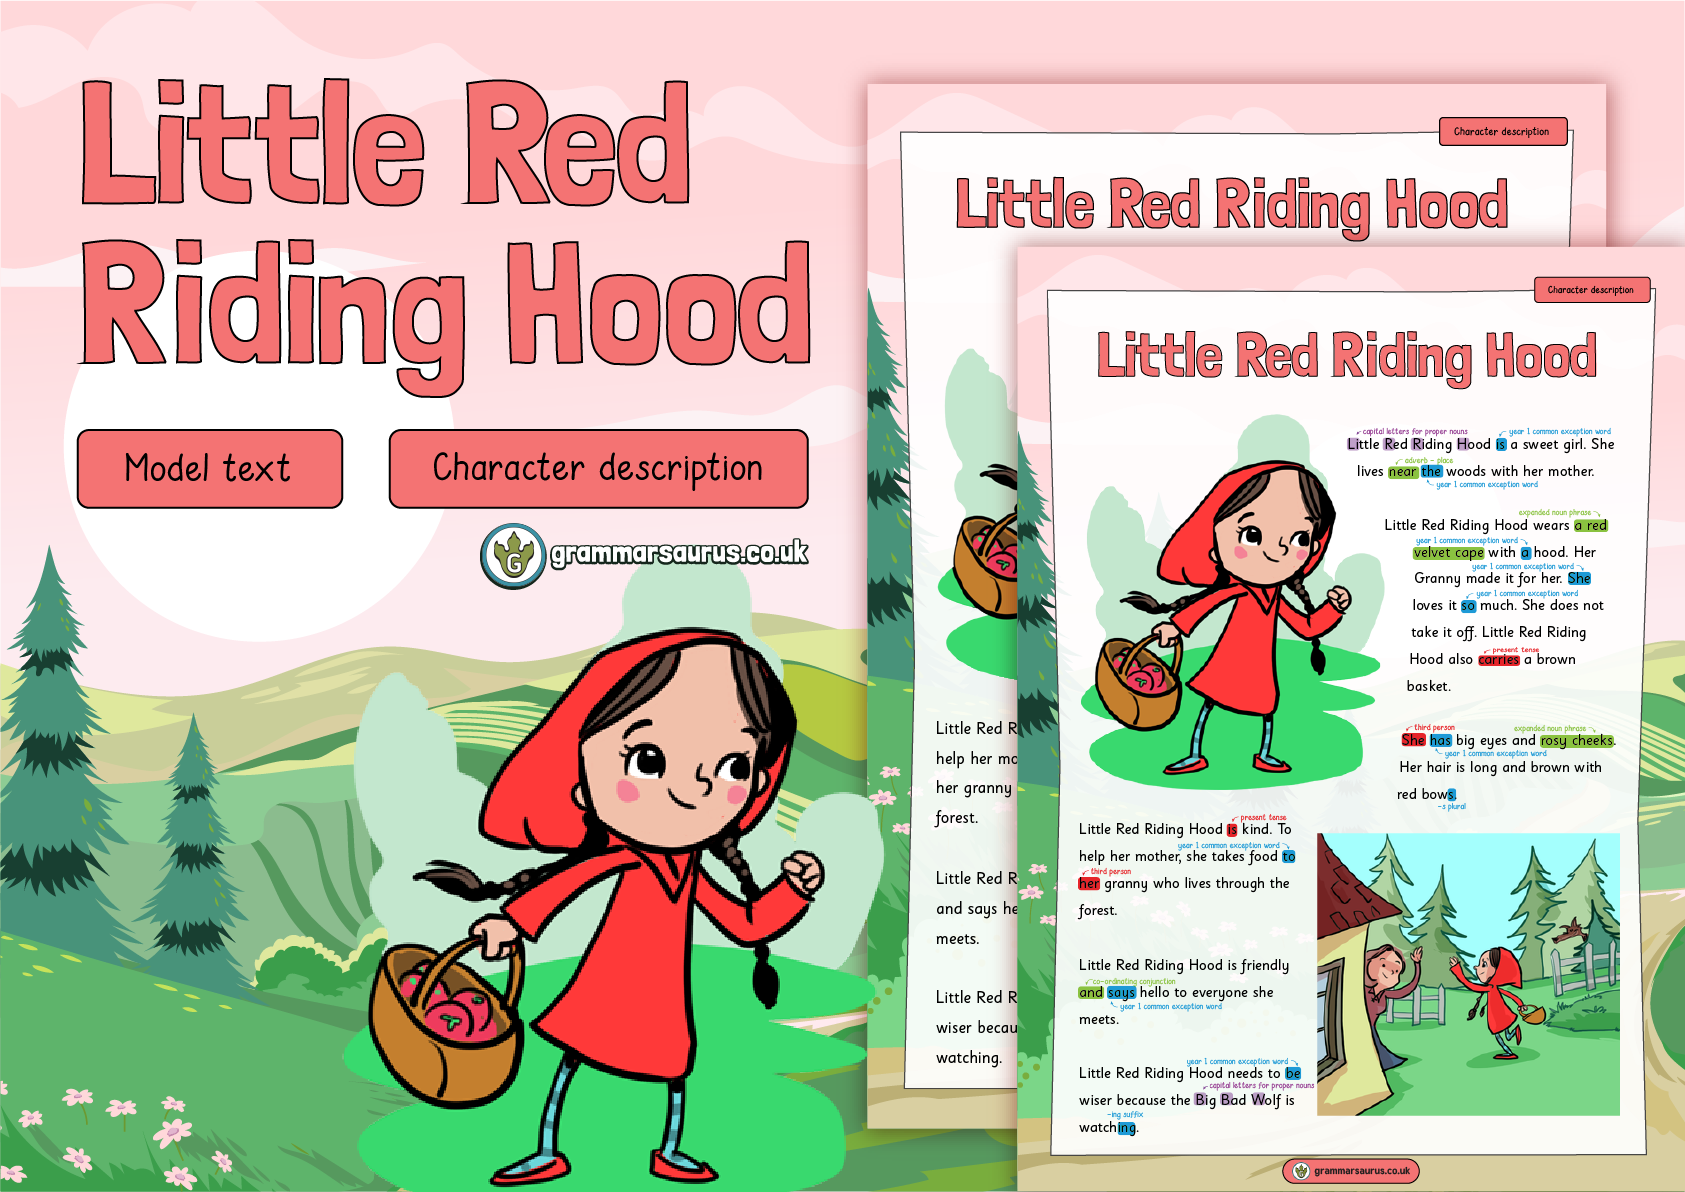 little-red-riding-hood-character-profile-little-red-riding-hood-by